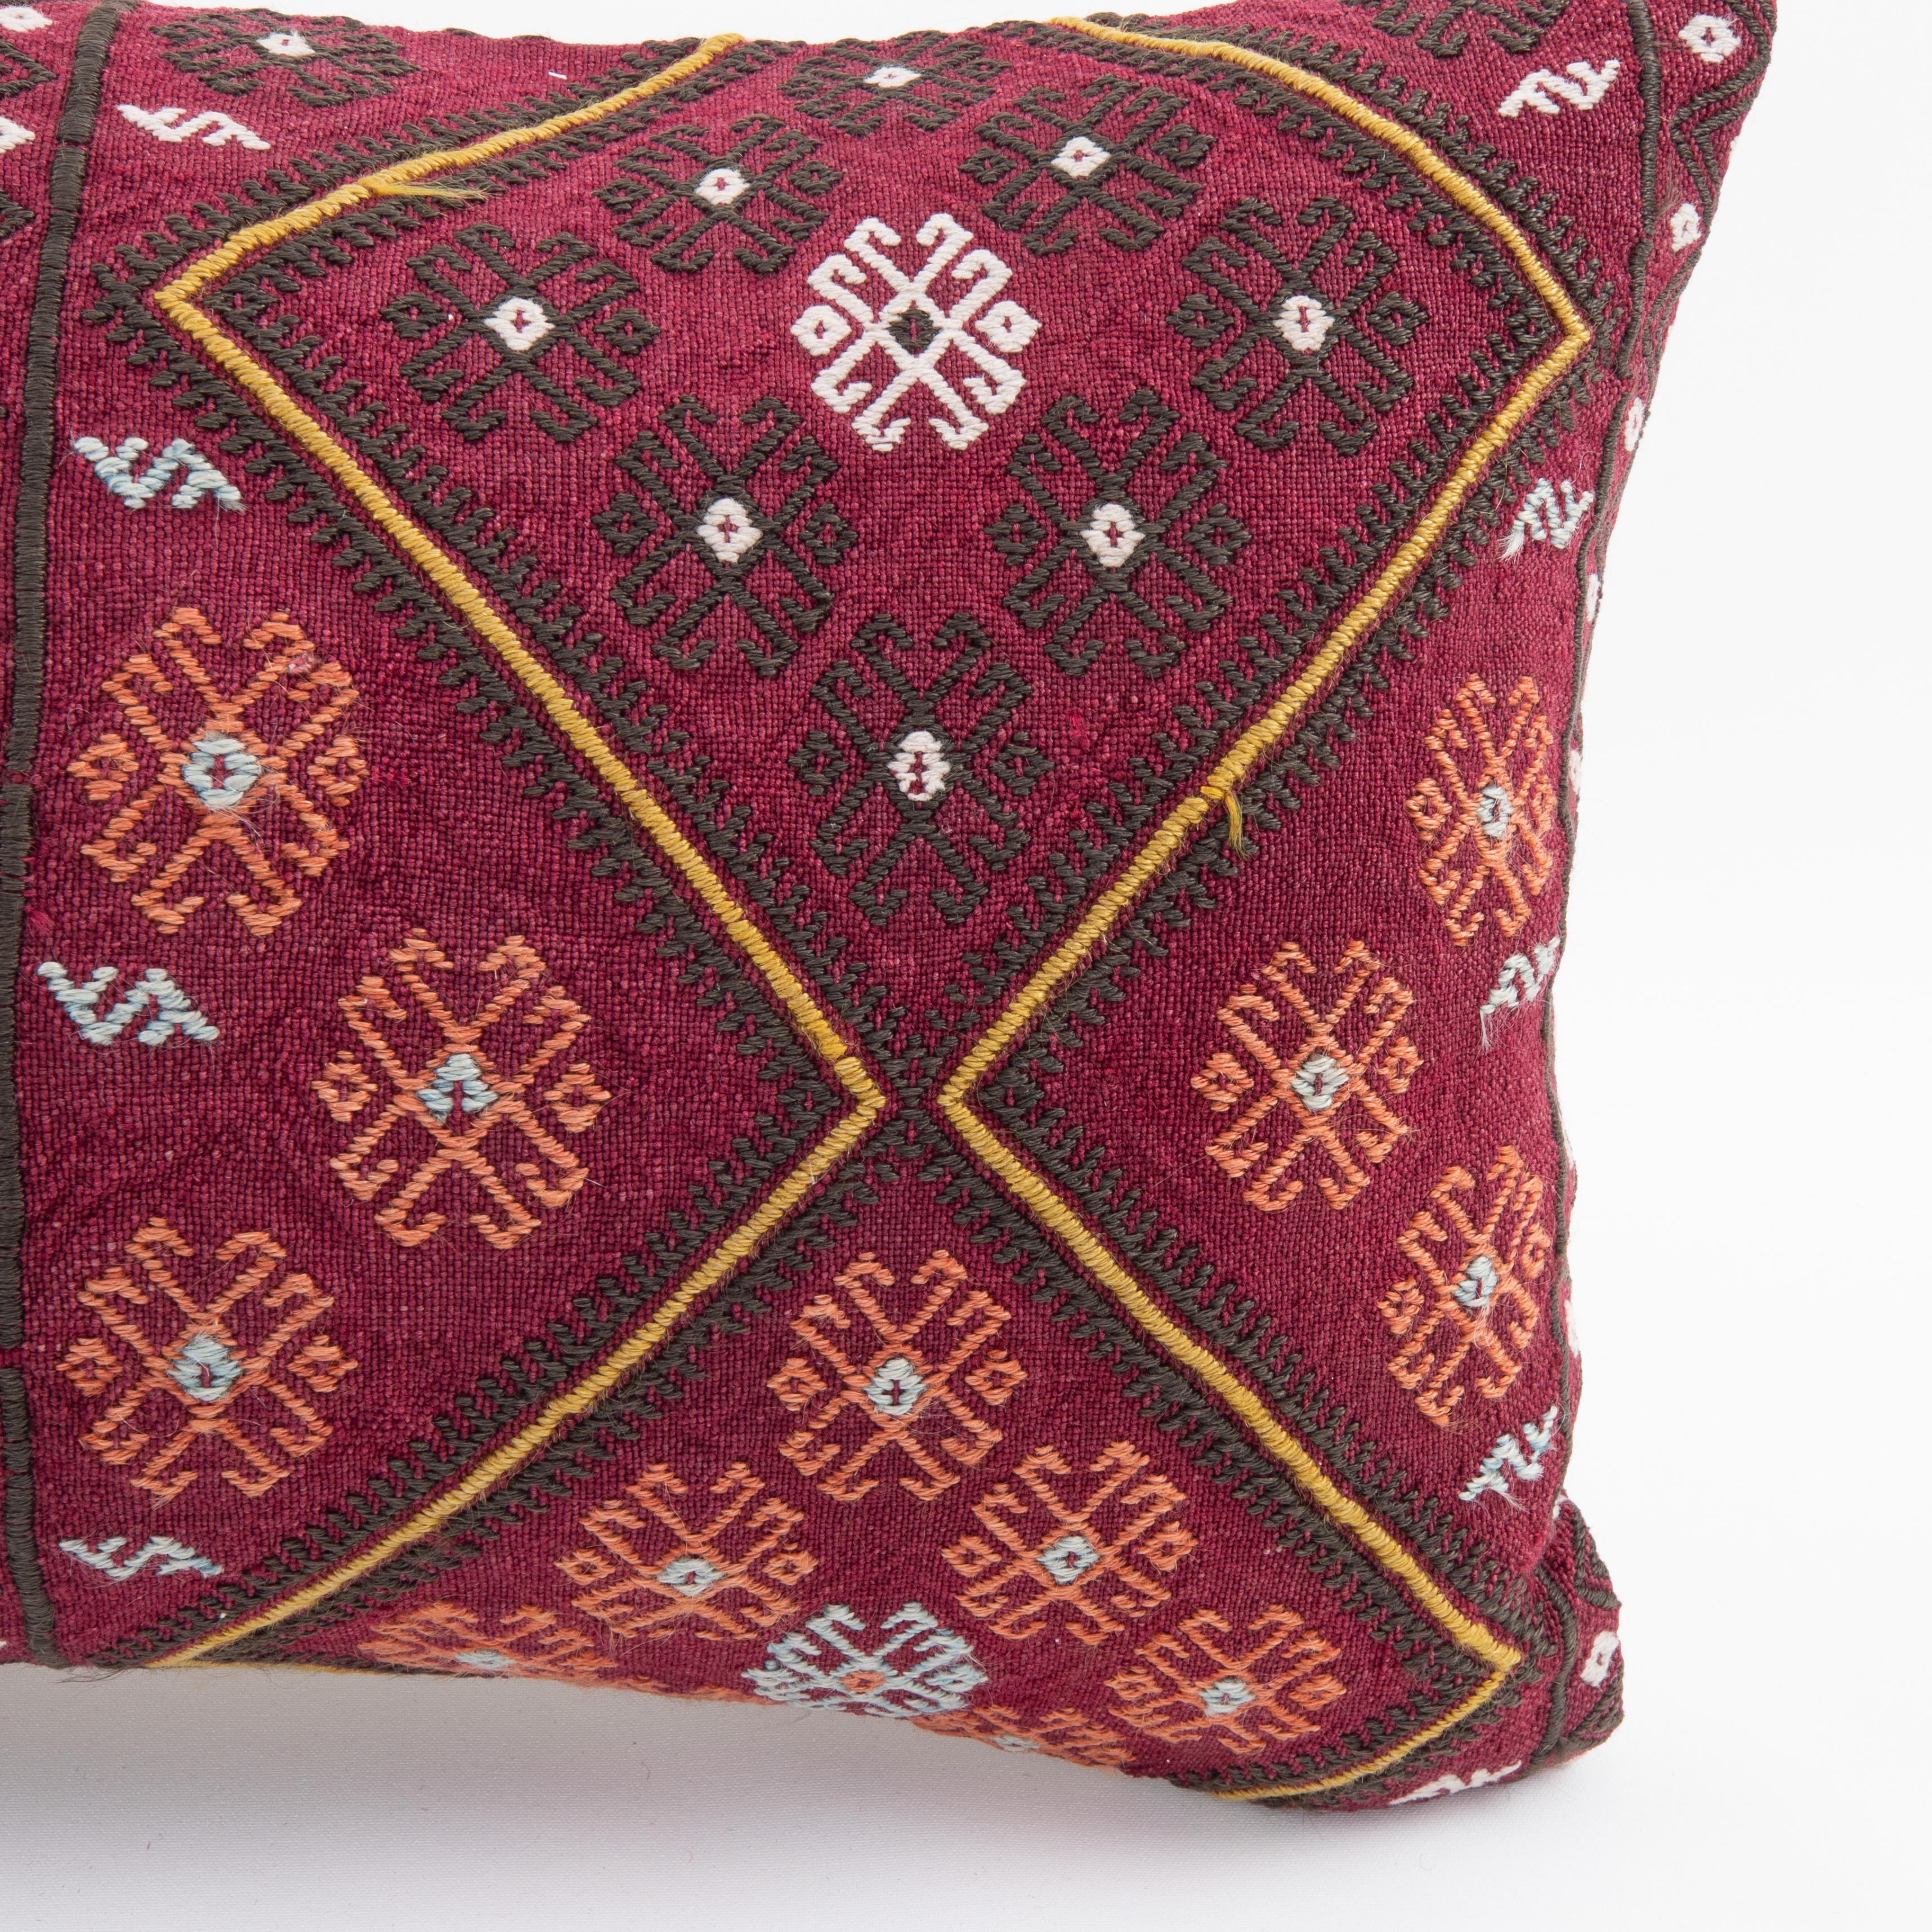 Hand-Woven Pillow Case Made from an Antique Anatolian Cicim Rug For Sale